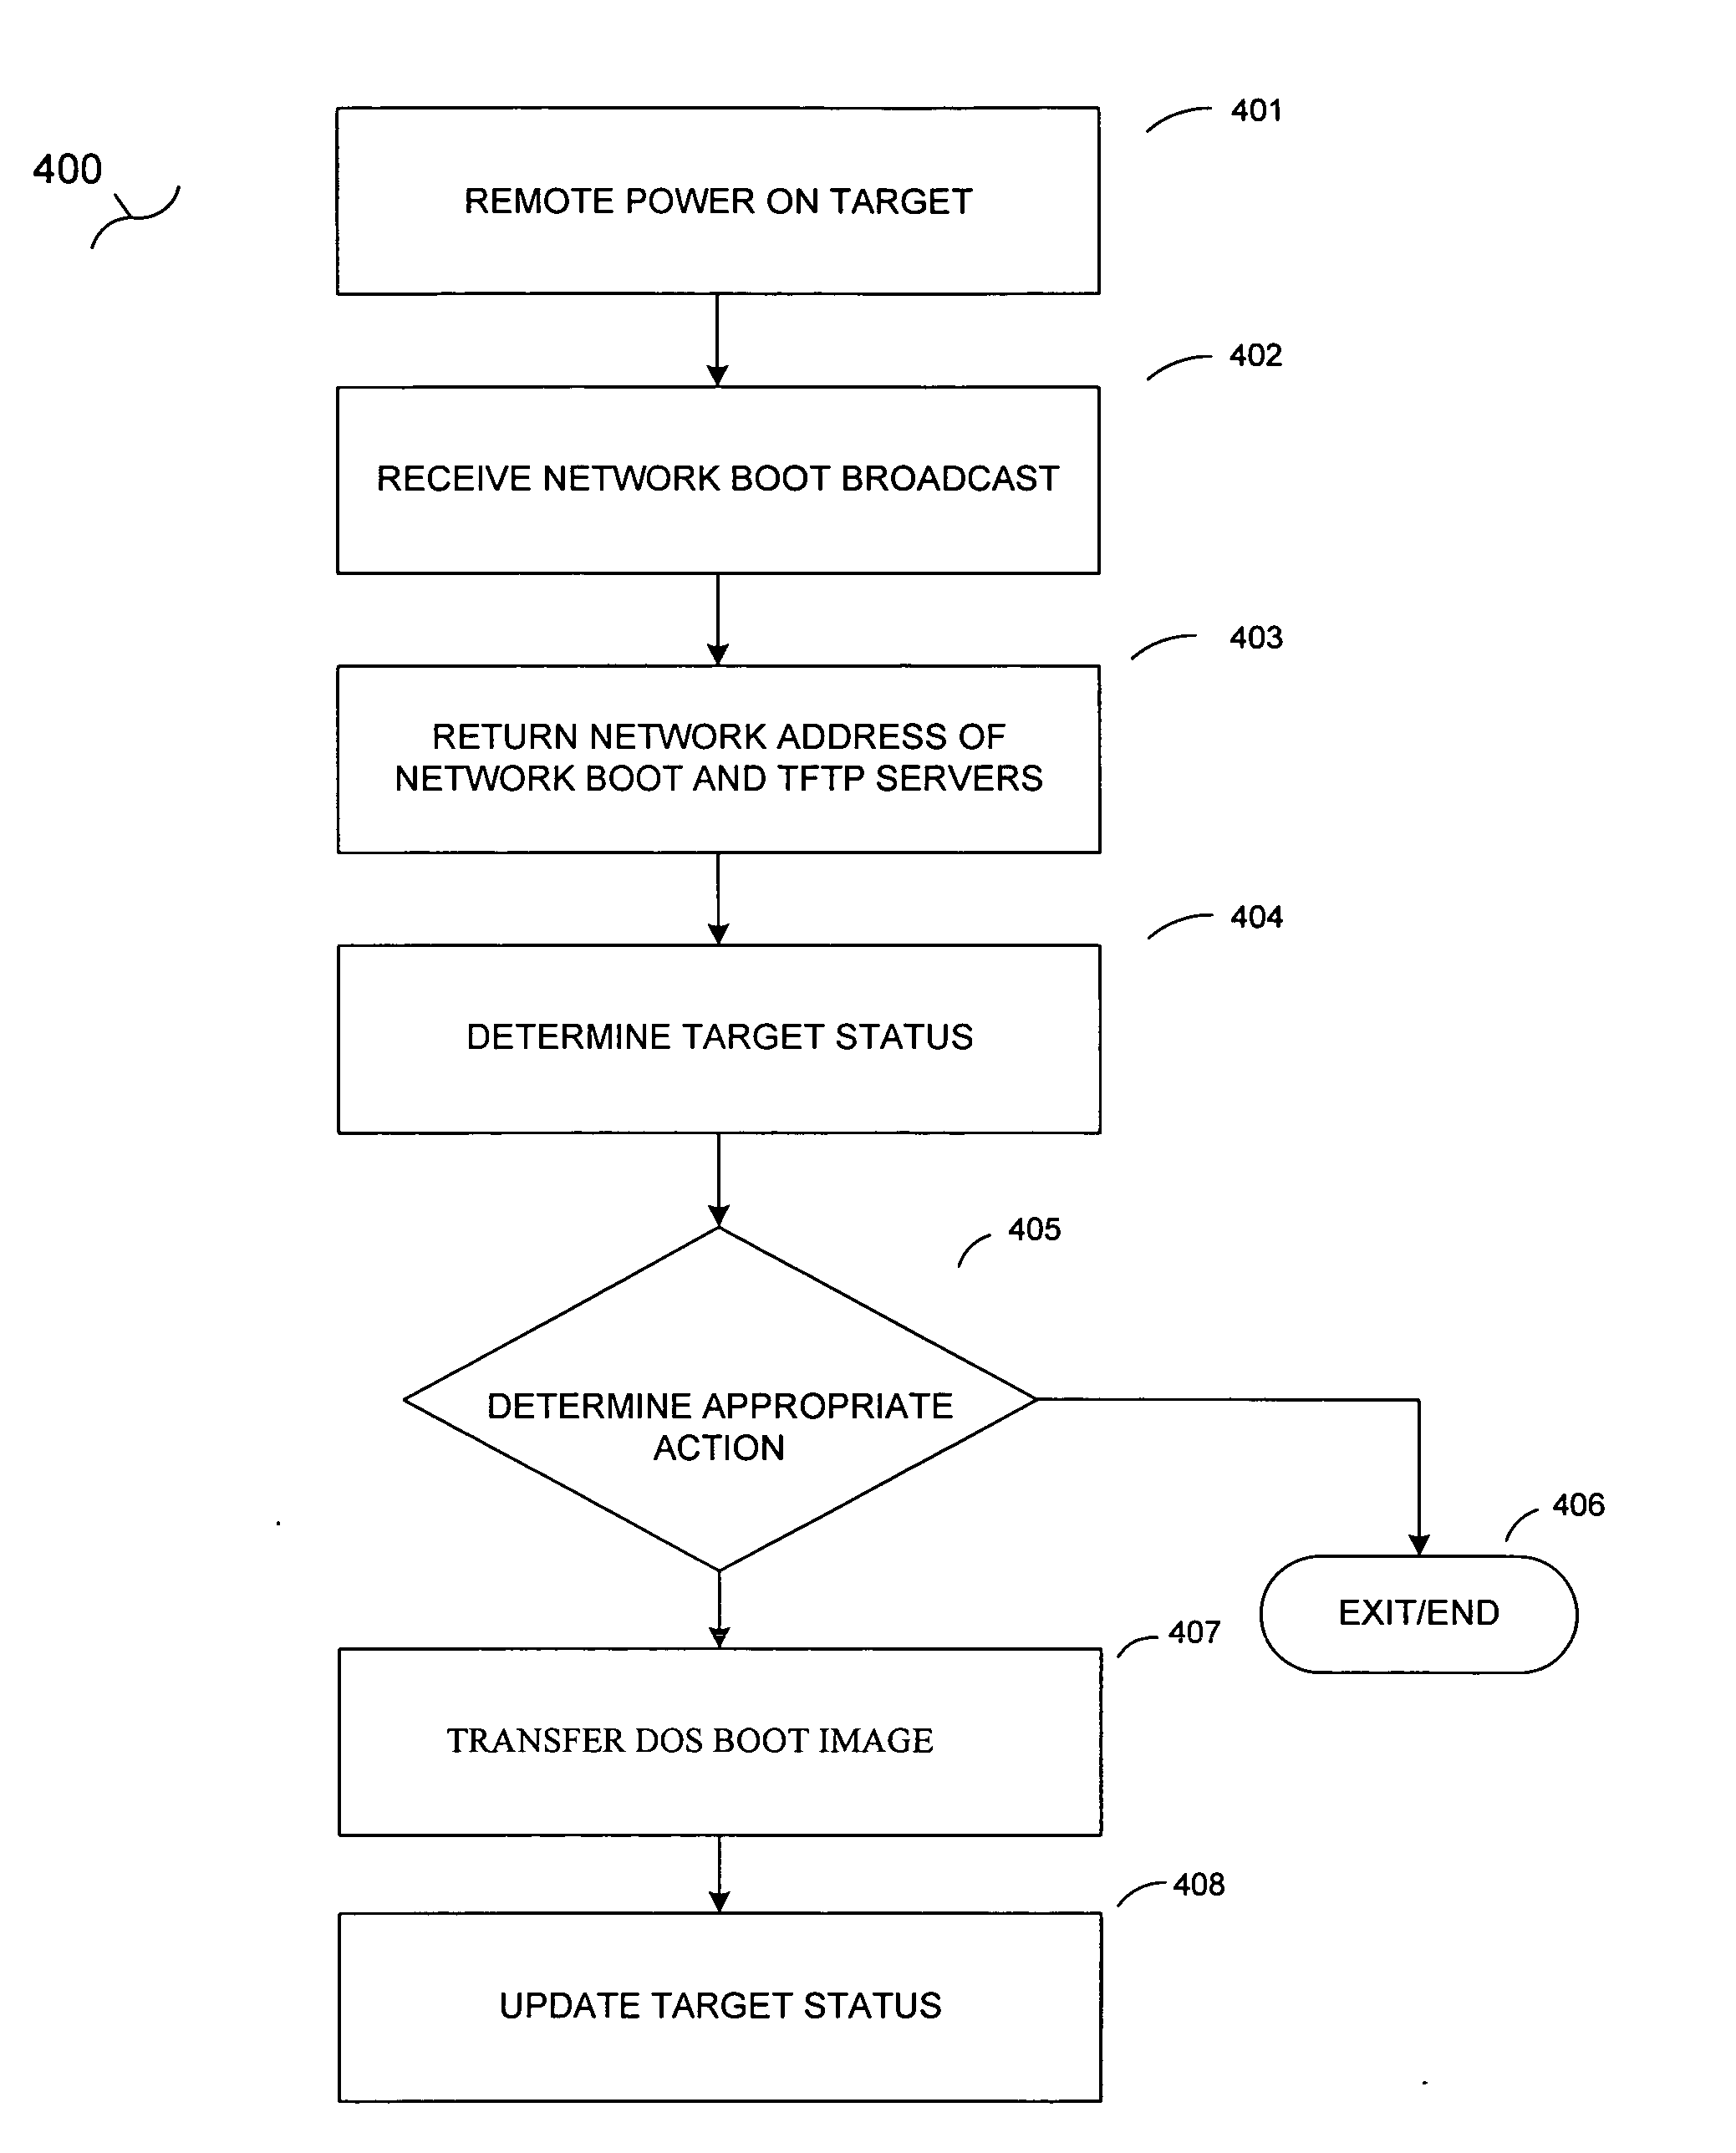 Method of applying constraints against discovered attributes in provisioning computers